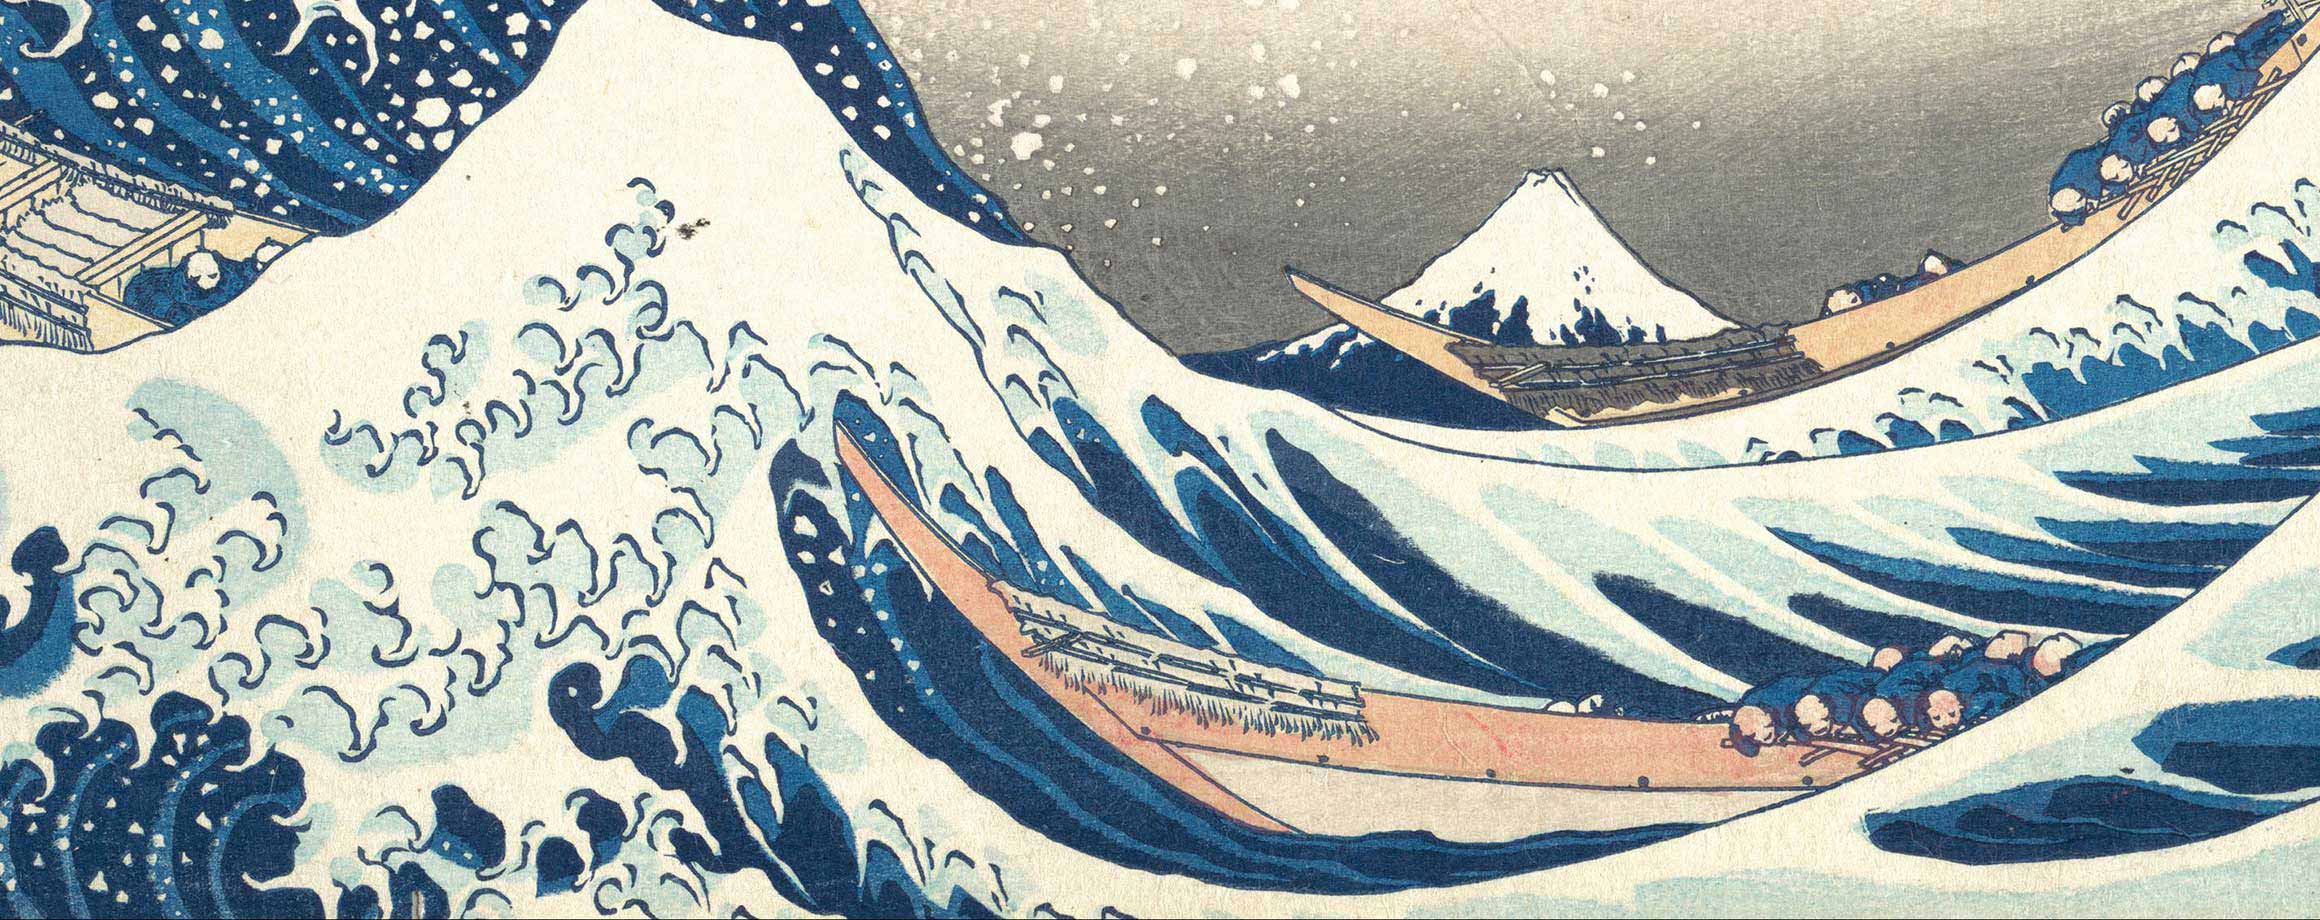 Detail of the Great Wave showing two boats on whitecapped blue waves with Mount Fuji in the distance